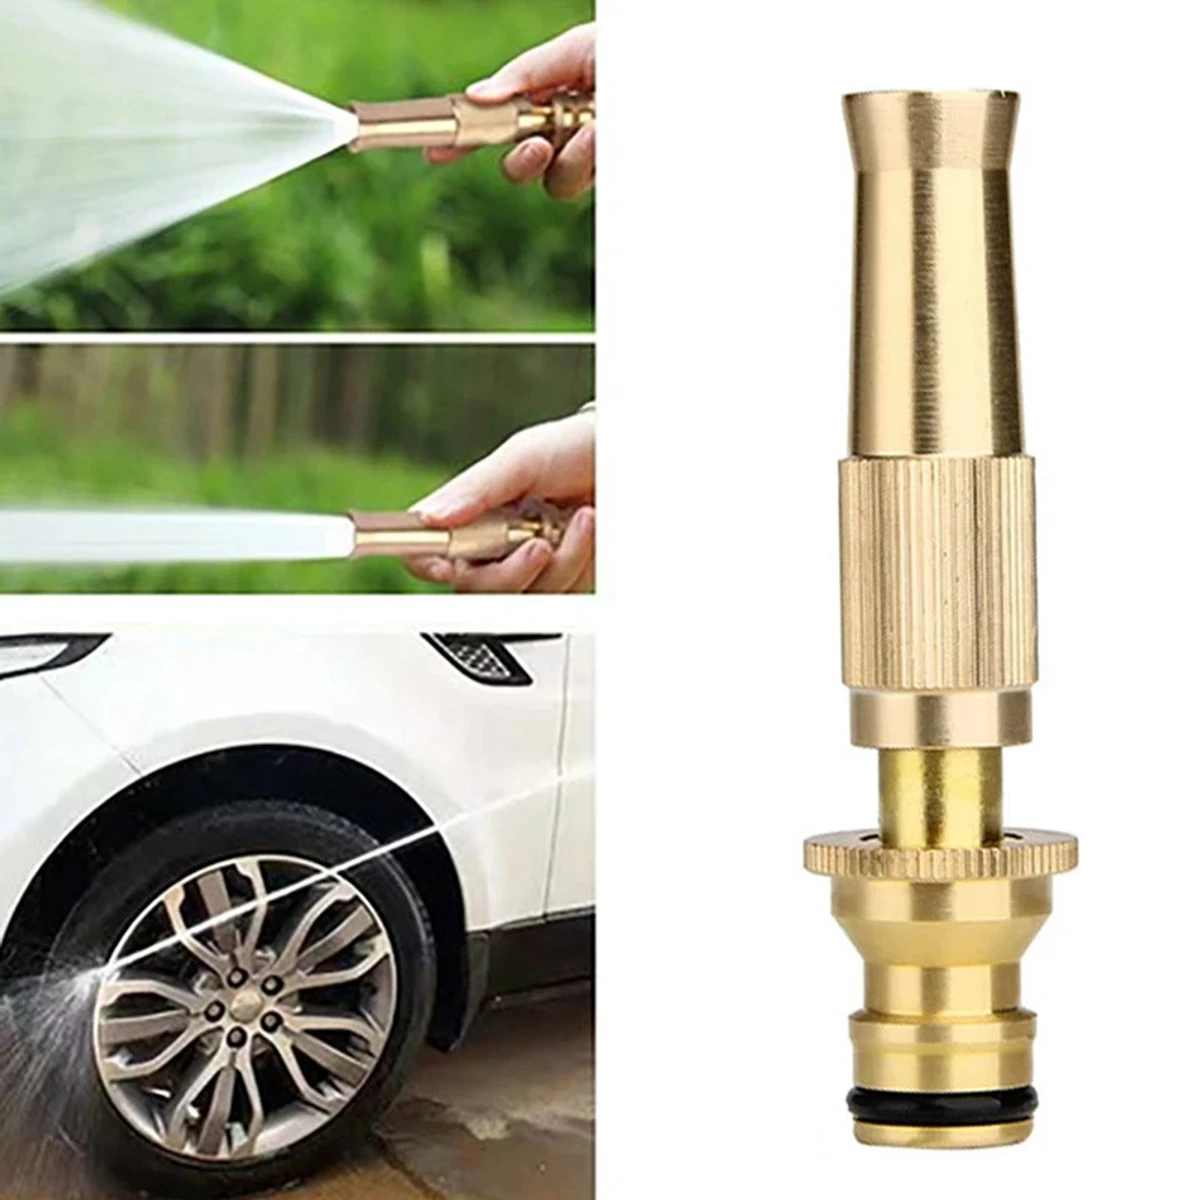 High Pressure Water Nozzle Household Pure Copper Direct Spray Gun Flower Watering Tool Adjustable Pressure Washer